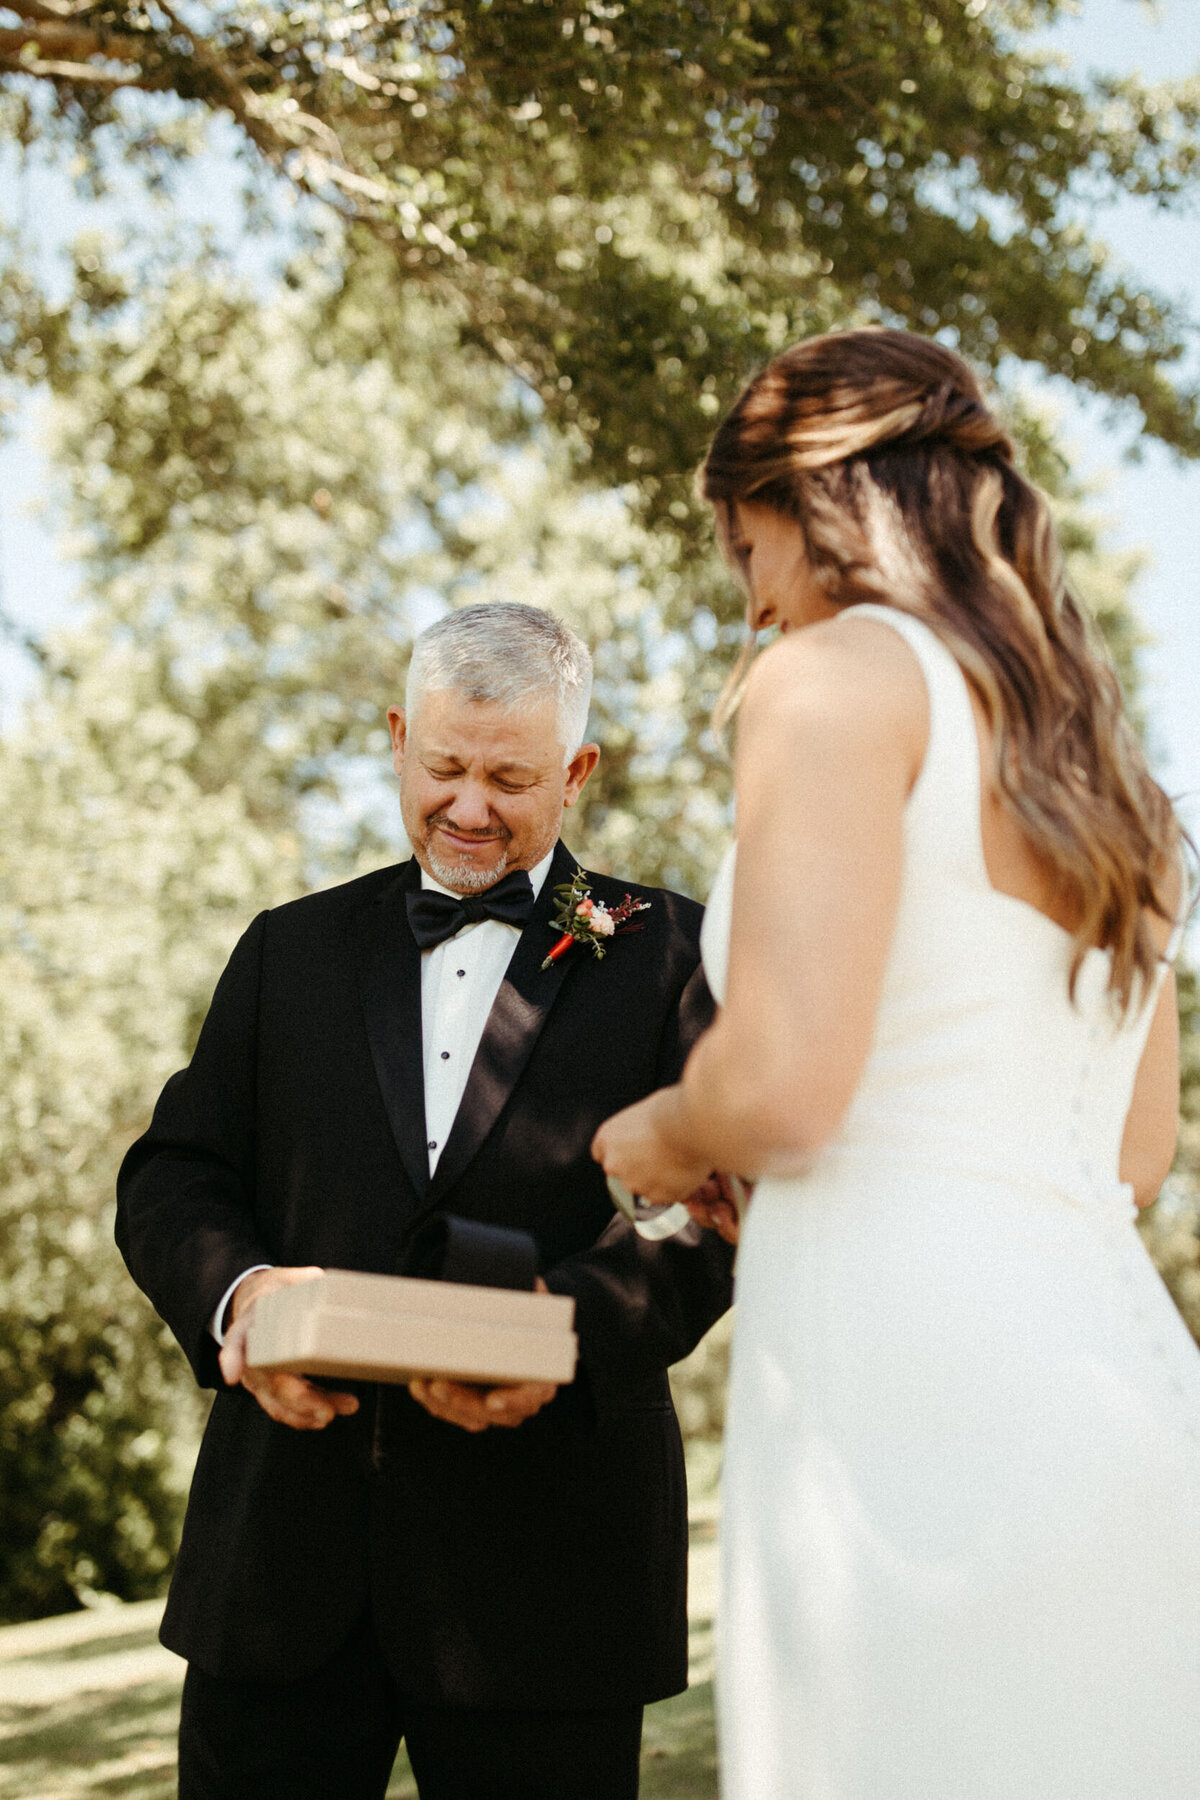 tupelo-mississippi-wedding-bride-first-look-with-dad-parent-gifts